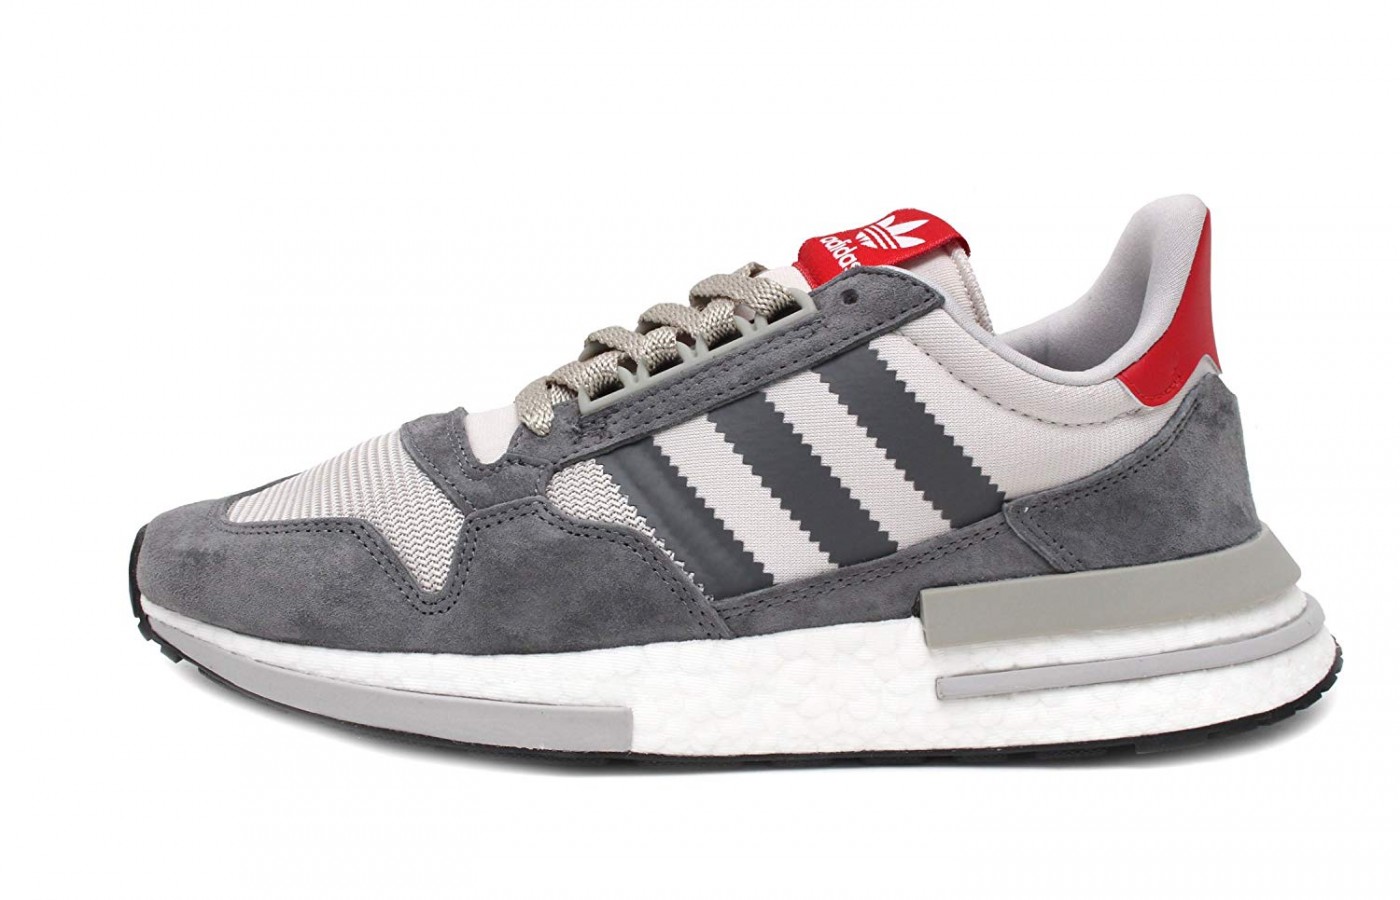 Adidas ZX 500 RM Reviewed for 